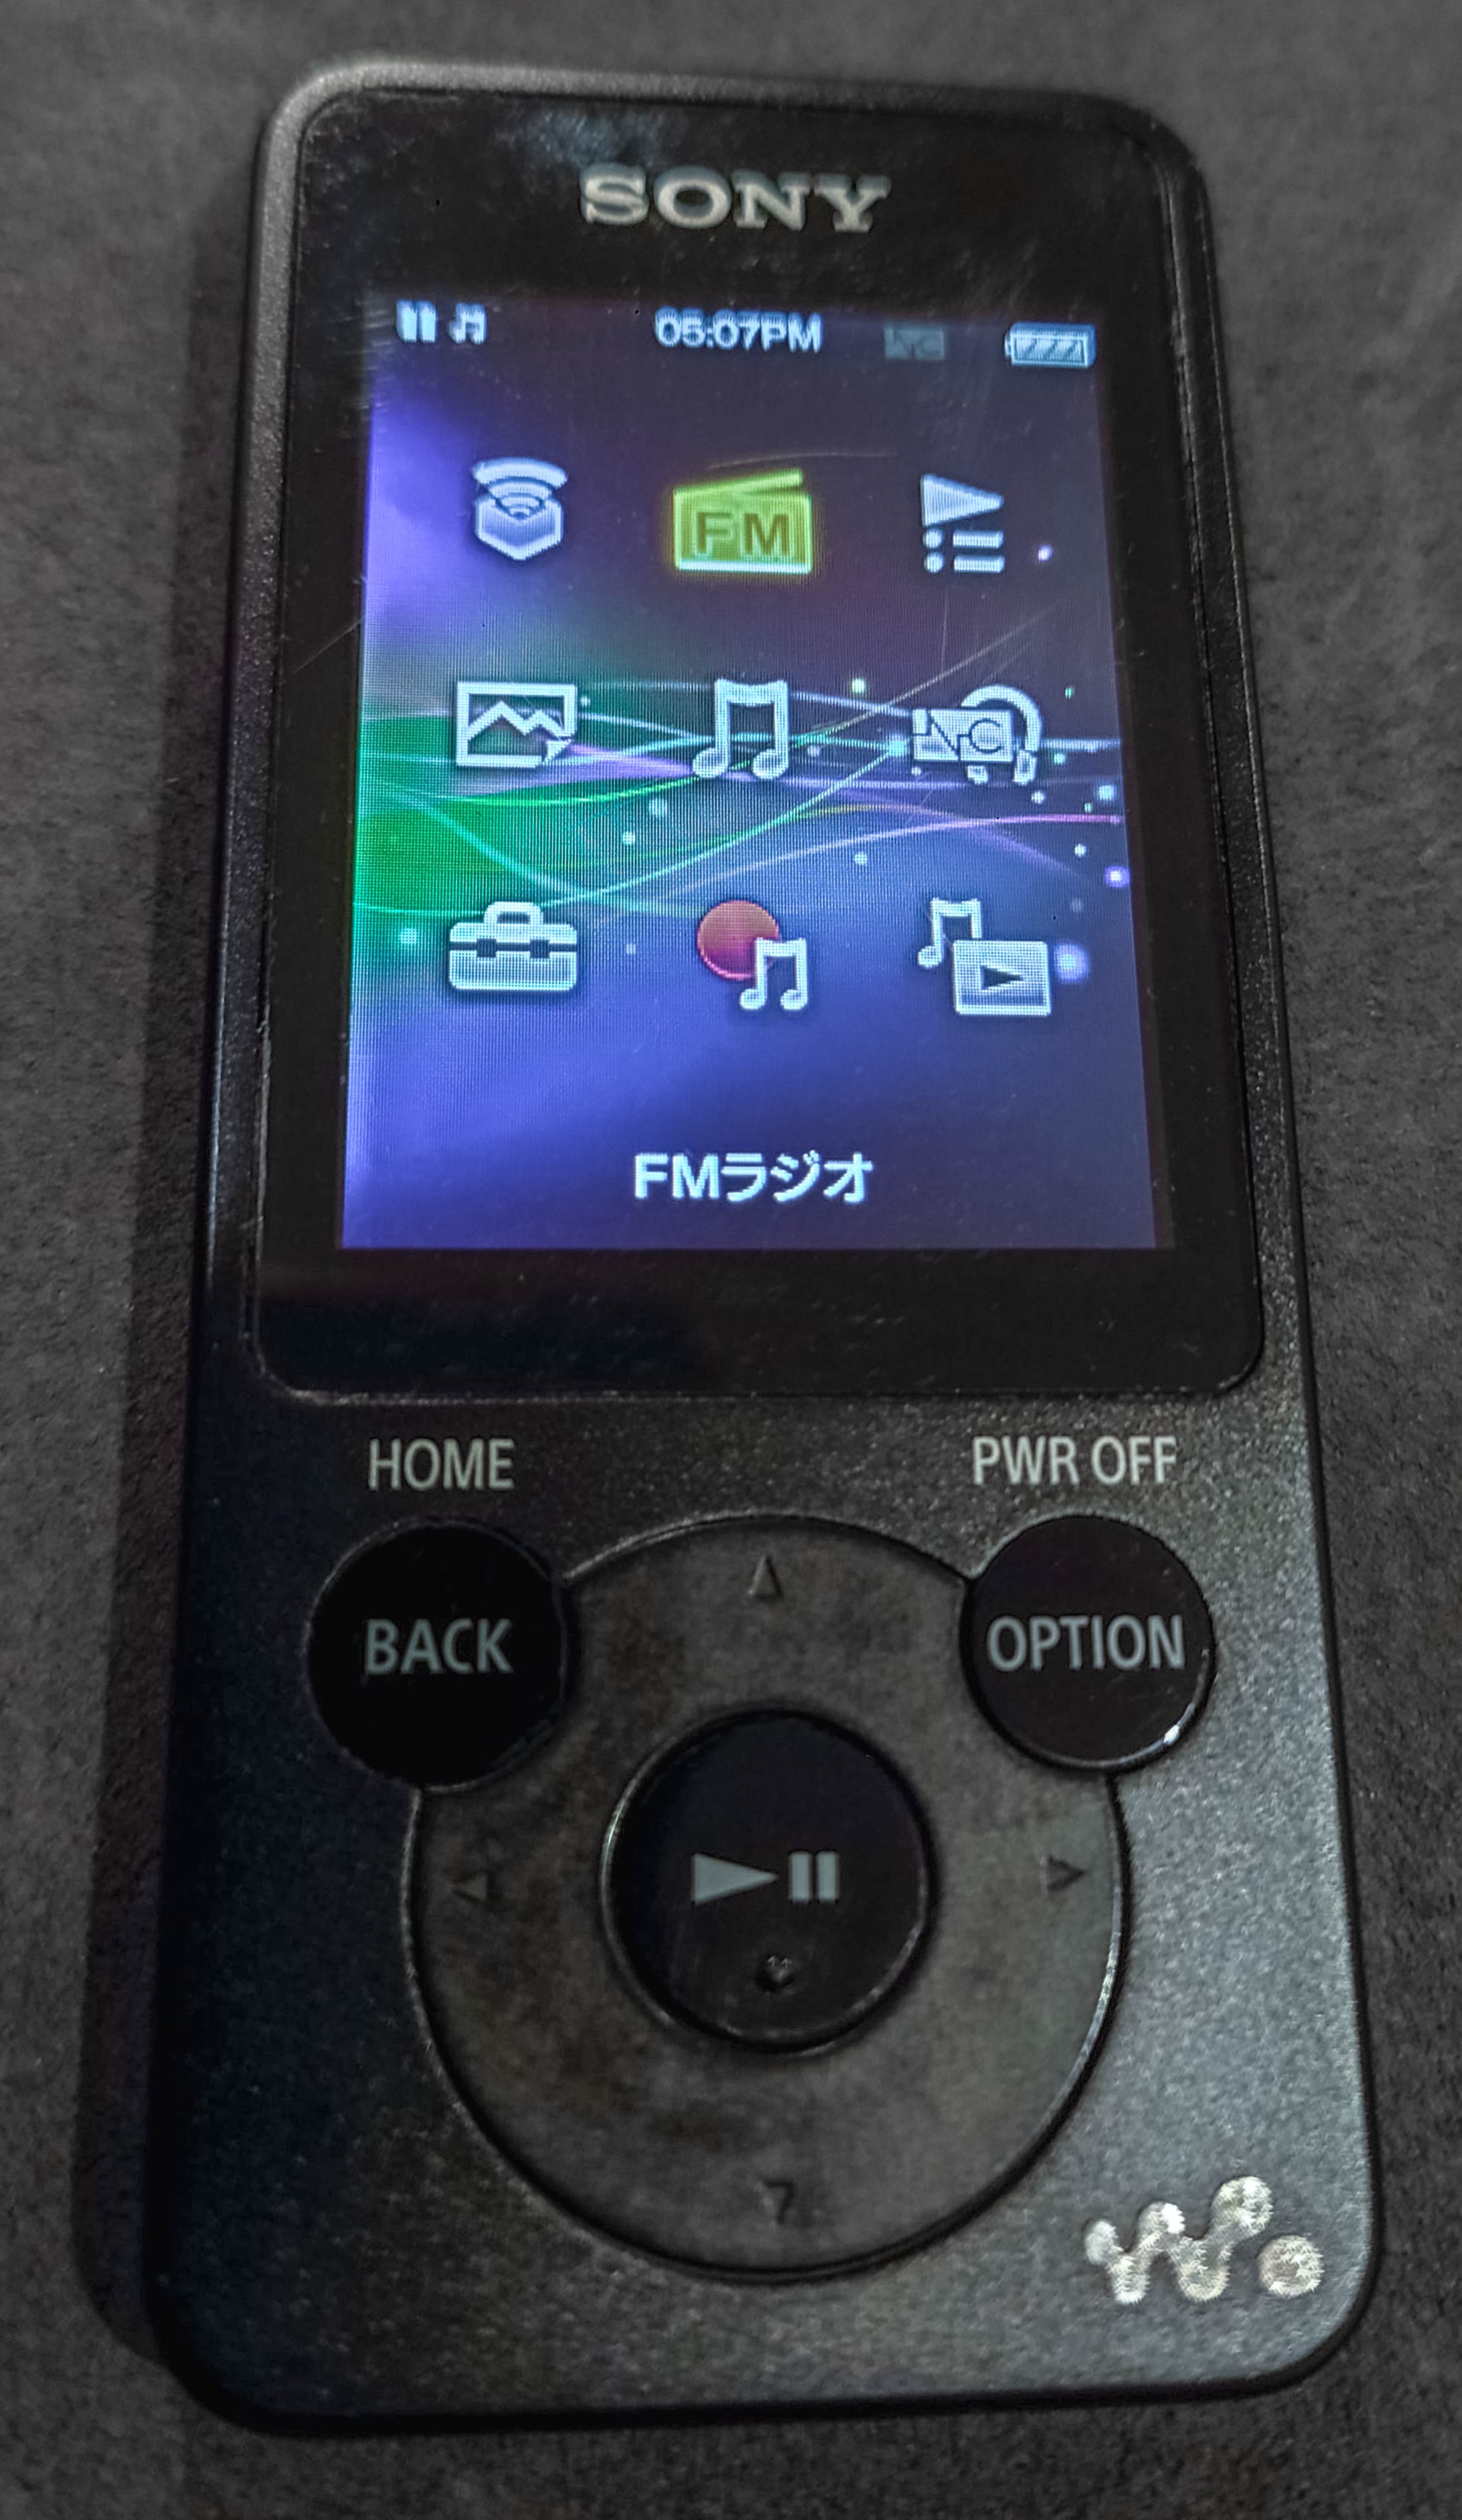 Front on up-close photograph of the black digital Walkman. Show a digital screen covering the top half of the Walkman, it has various options on it. Then below that, a back, option and home control interface.